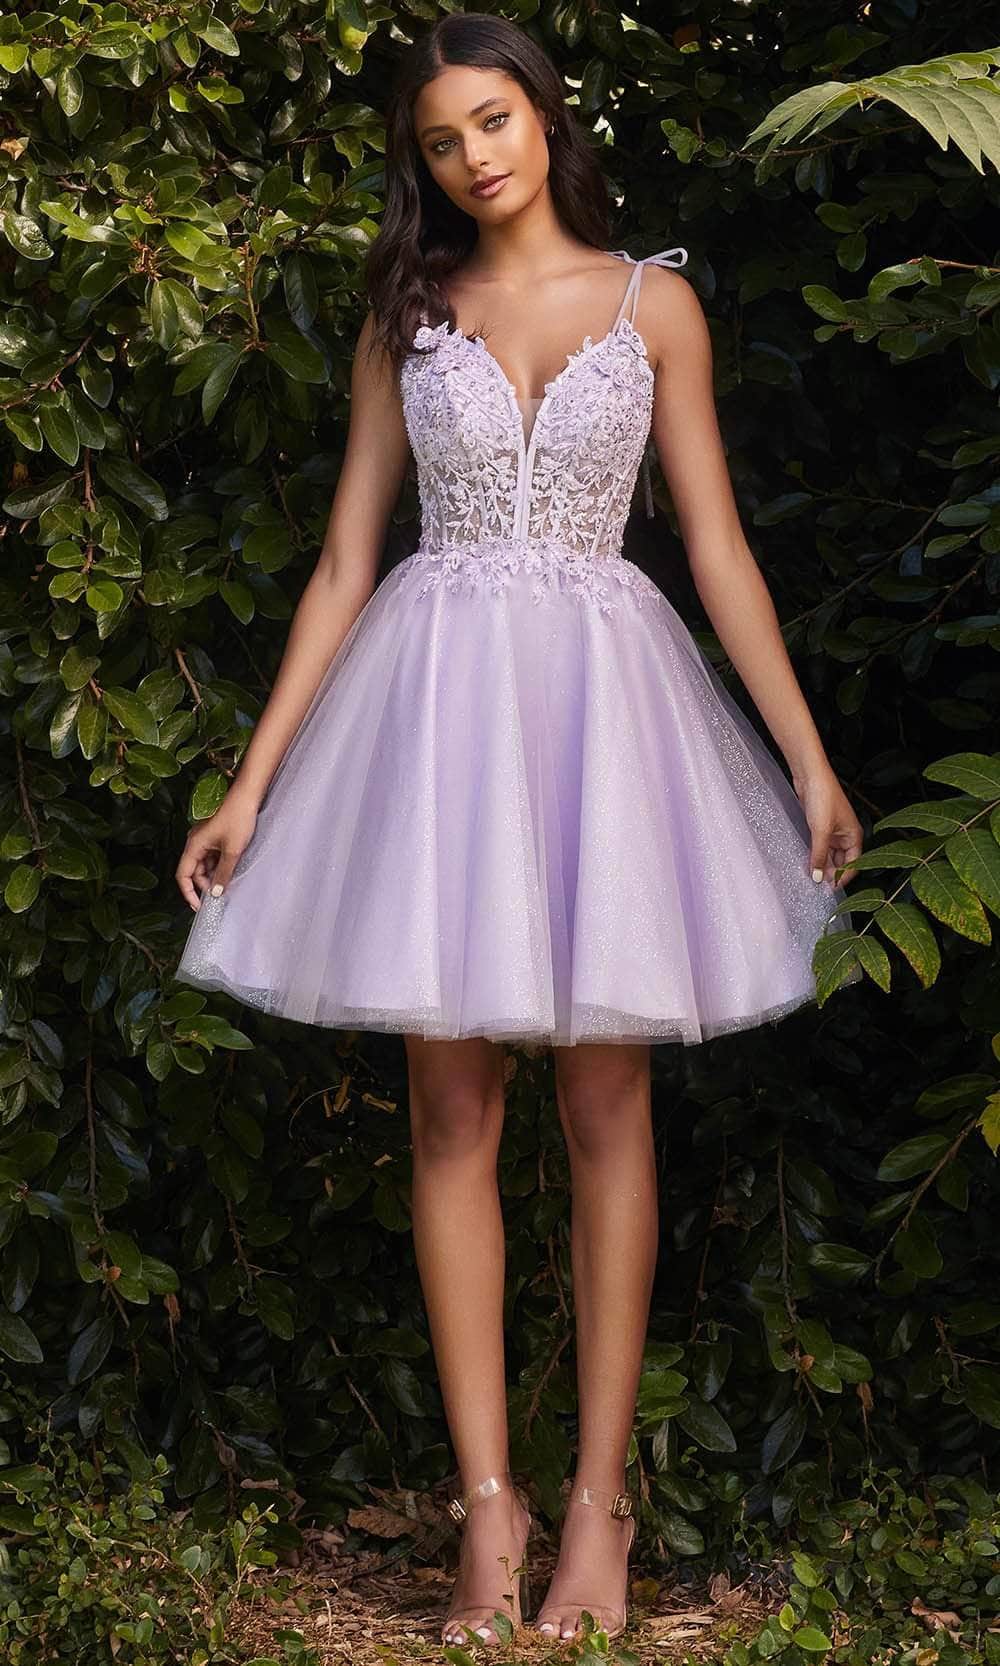 Ladivine CD0188 - Corset Applique Tulle and Lace Prom Dress
